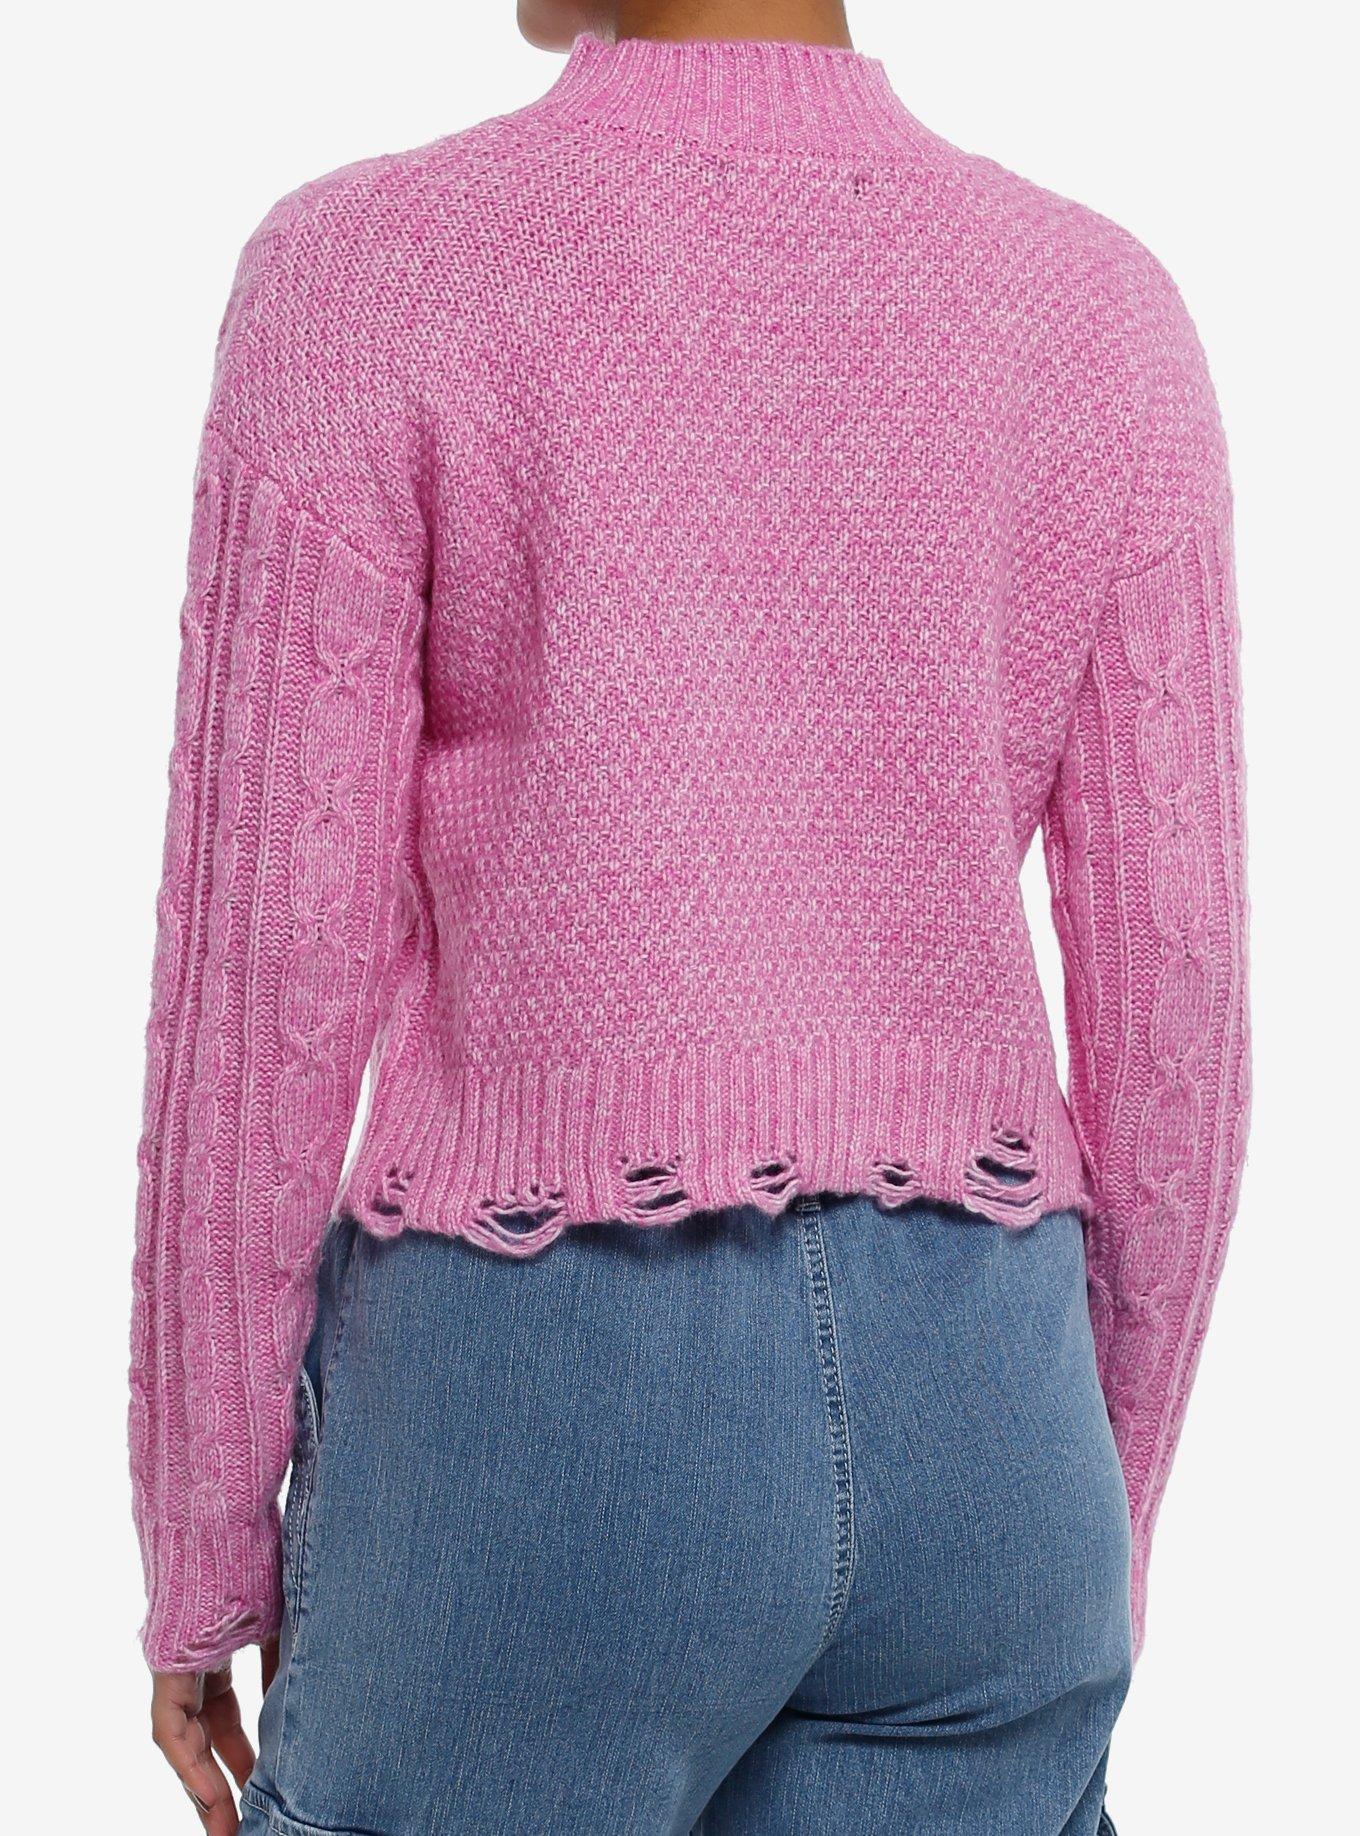 Magenta Cable Knit Girls Crop Sweater, PINK, alternate